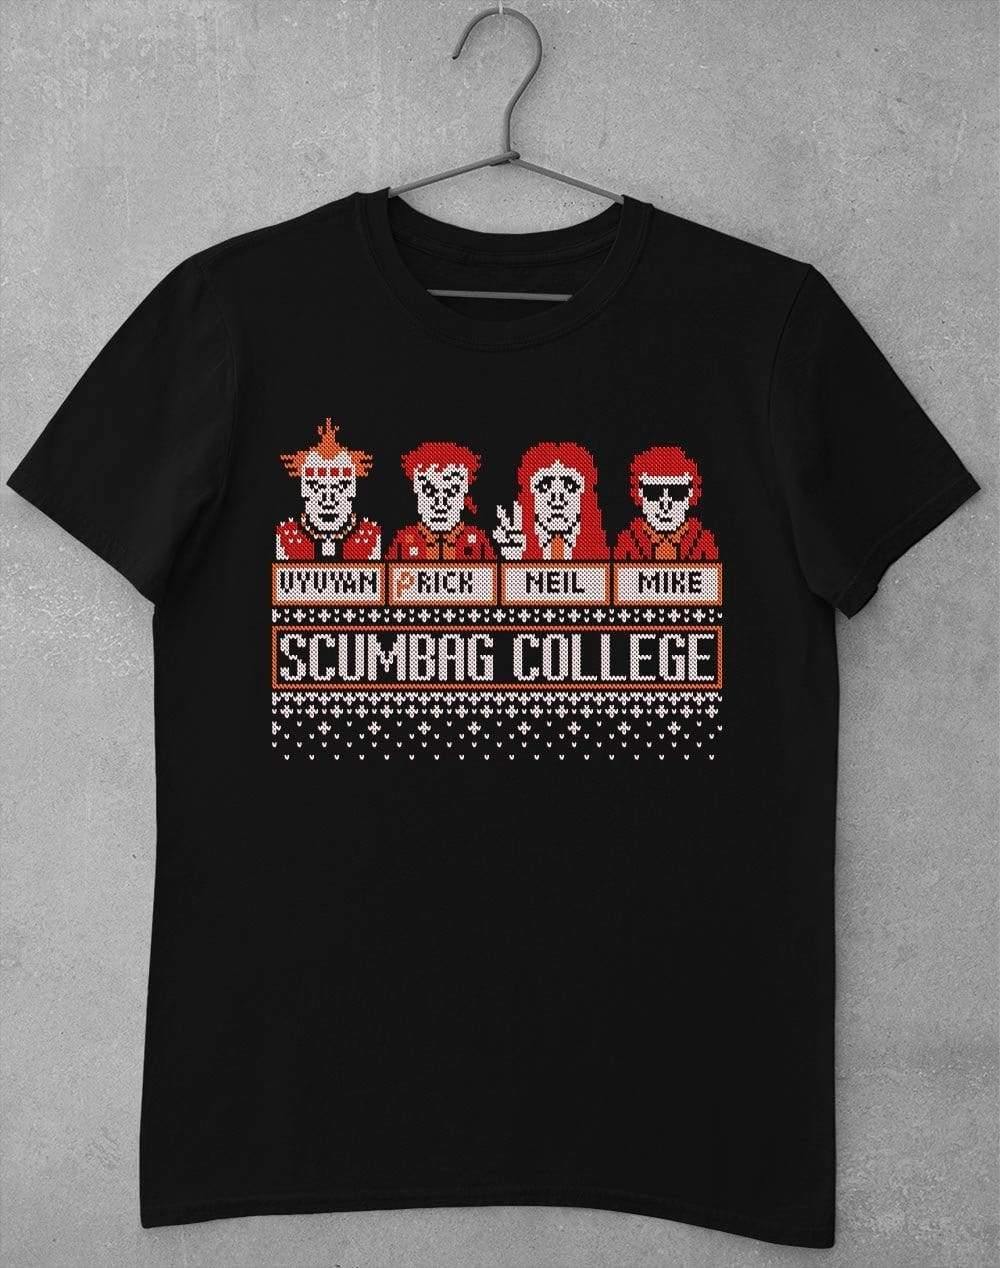 Scumbag College Festive Knitted-Look T-Shirt S / Black  - Off World Tees